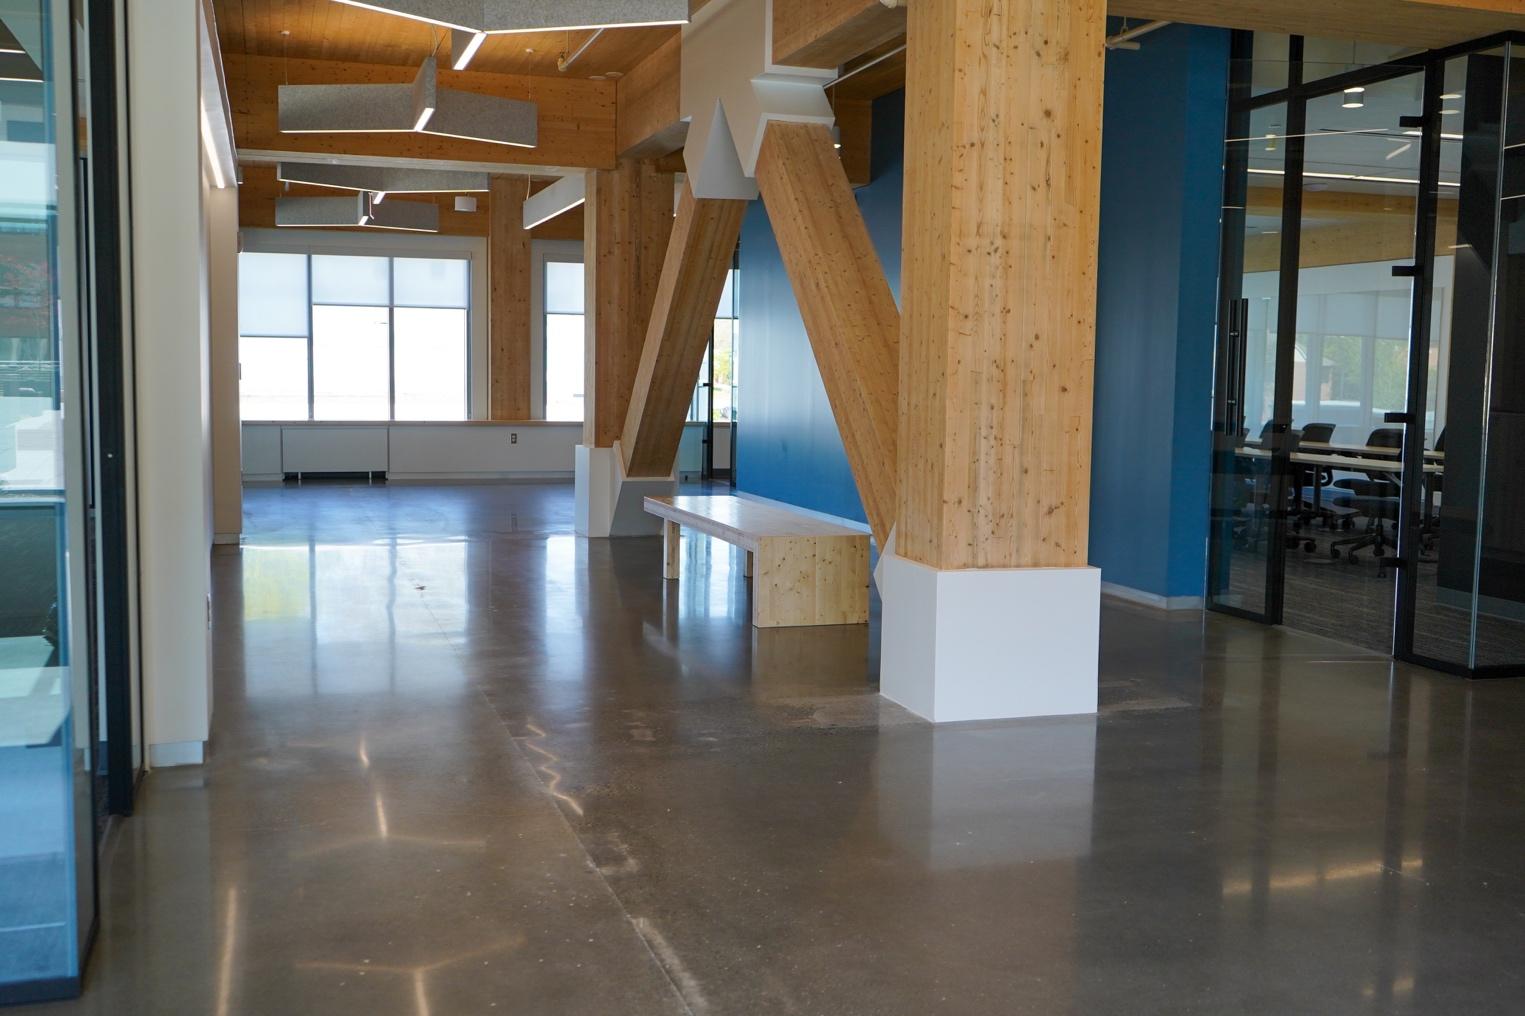 An imperfect polished concrete floor.